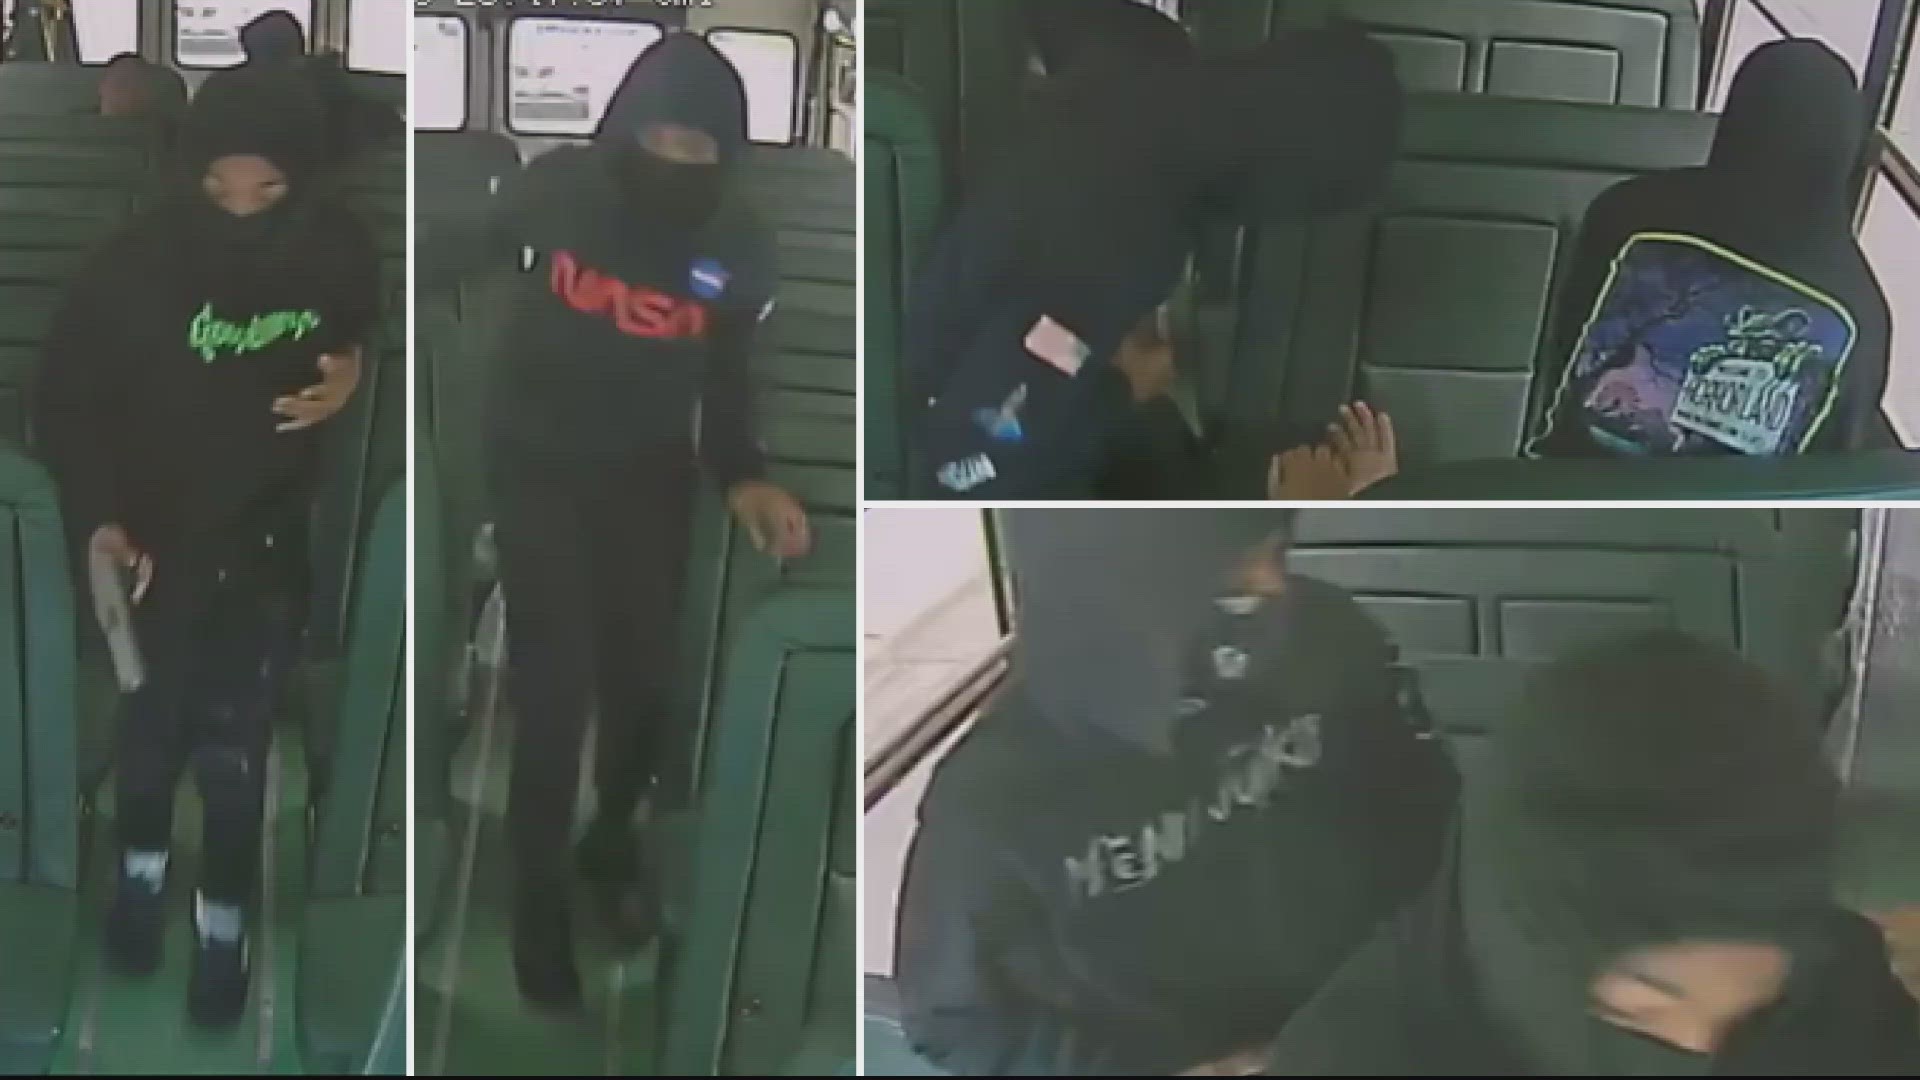 Prince George's County Police tell us they arrested 2 teens - accused of trying to kill a 14-year-old boy on a bus. You can see it all going down in this video.